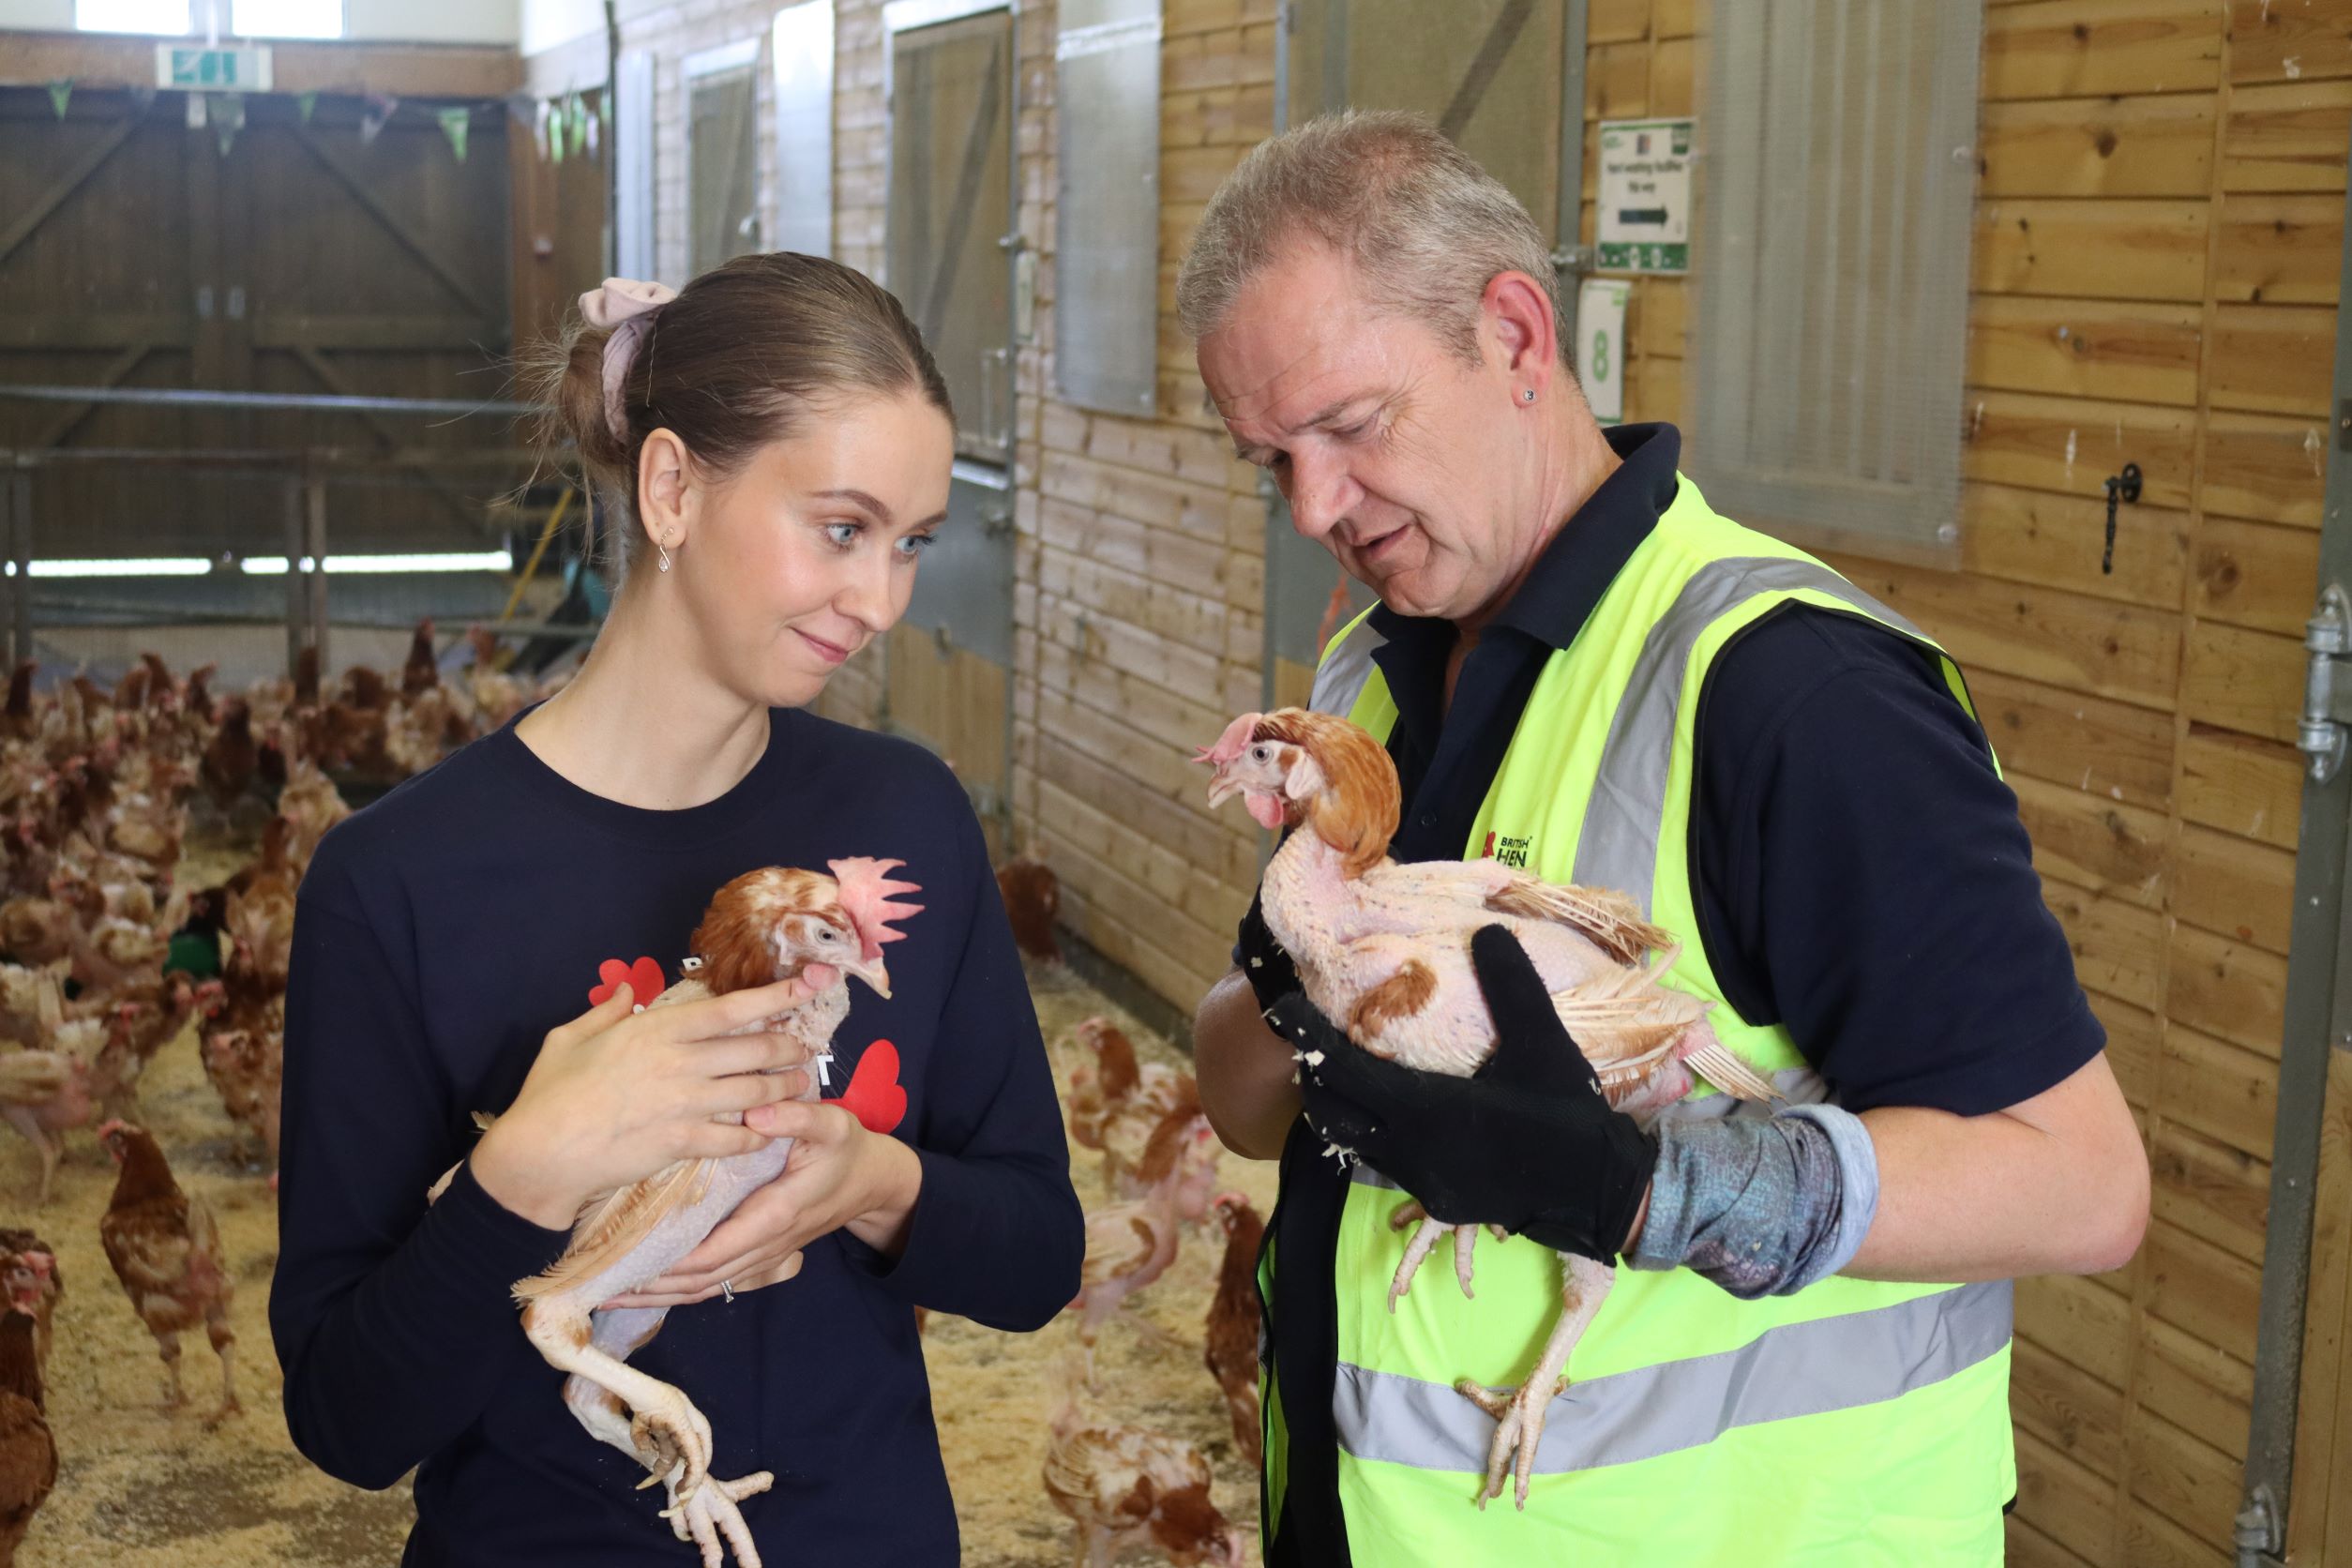 NEWS | Over 1,200 hens were saved from slaughter and adopted in Hereford during 2021